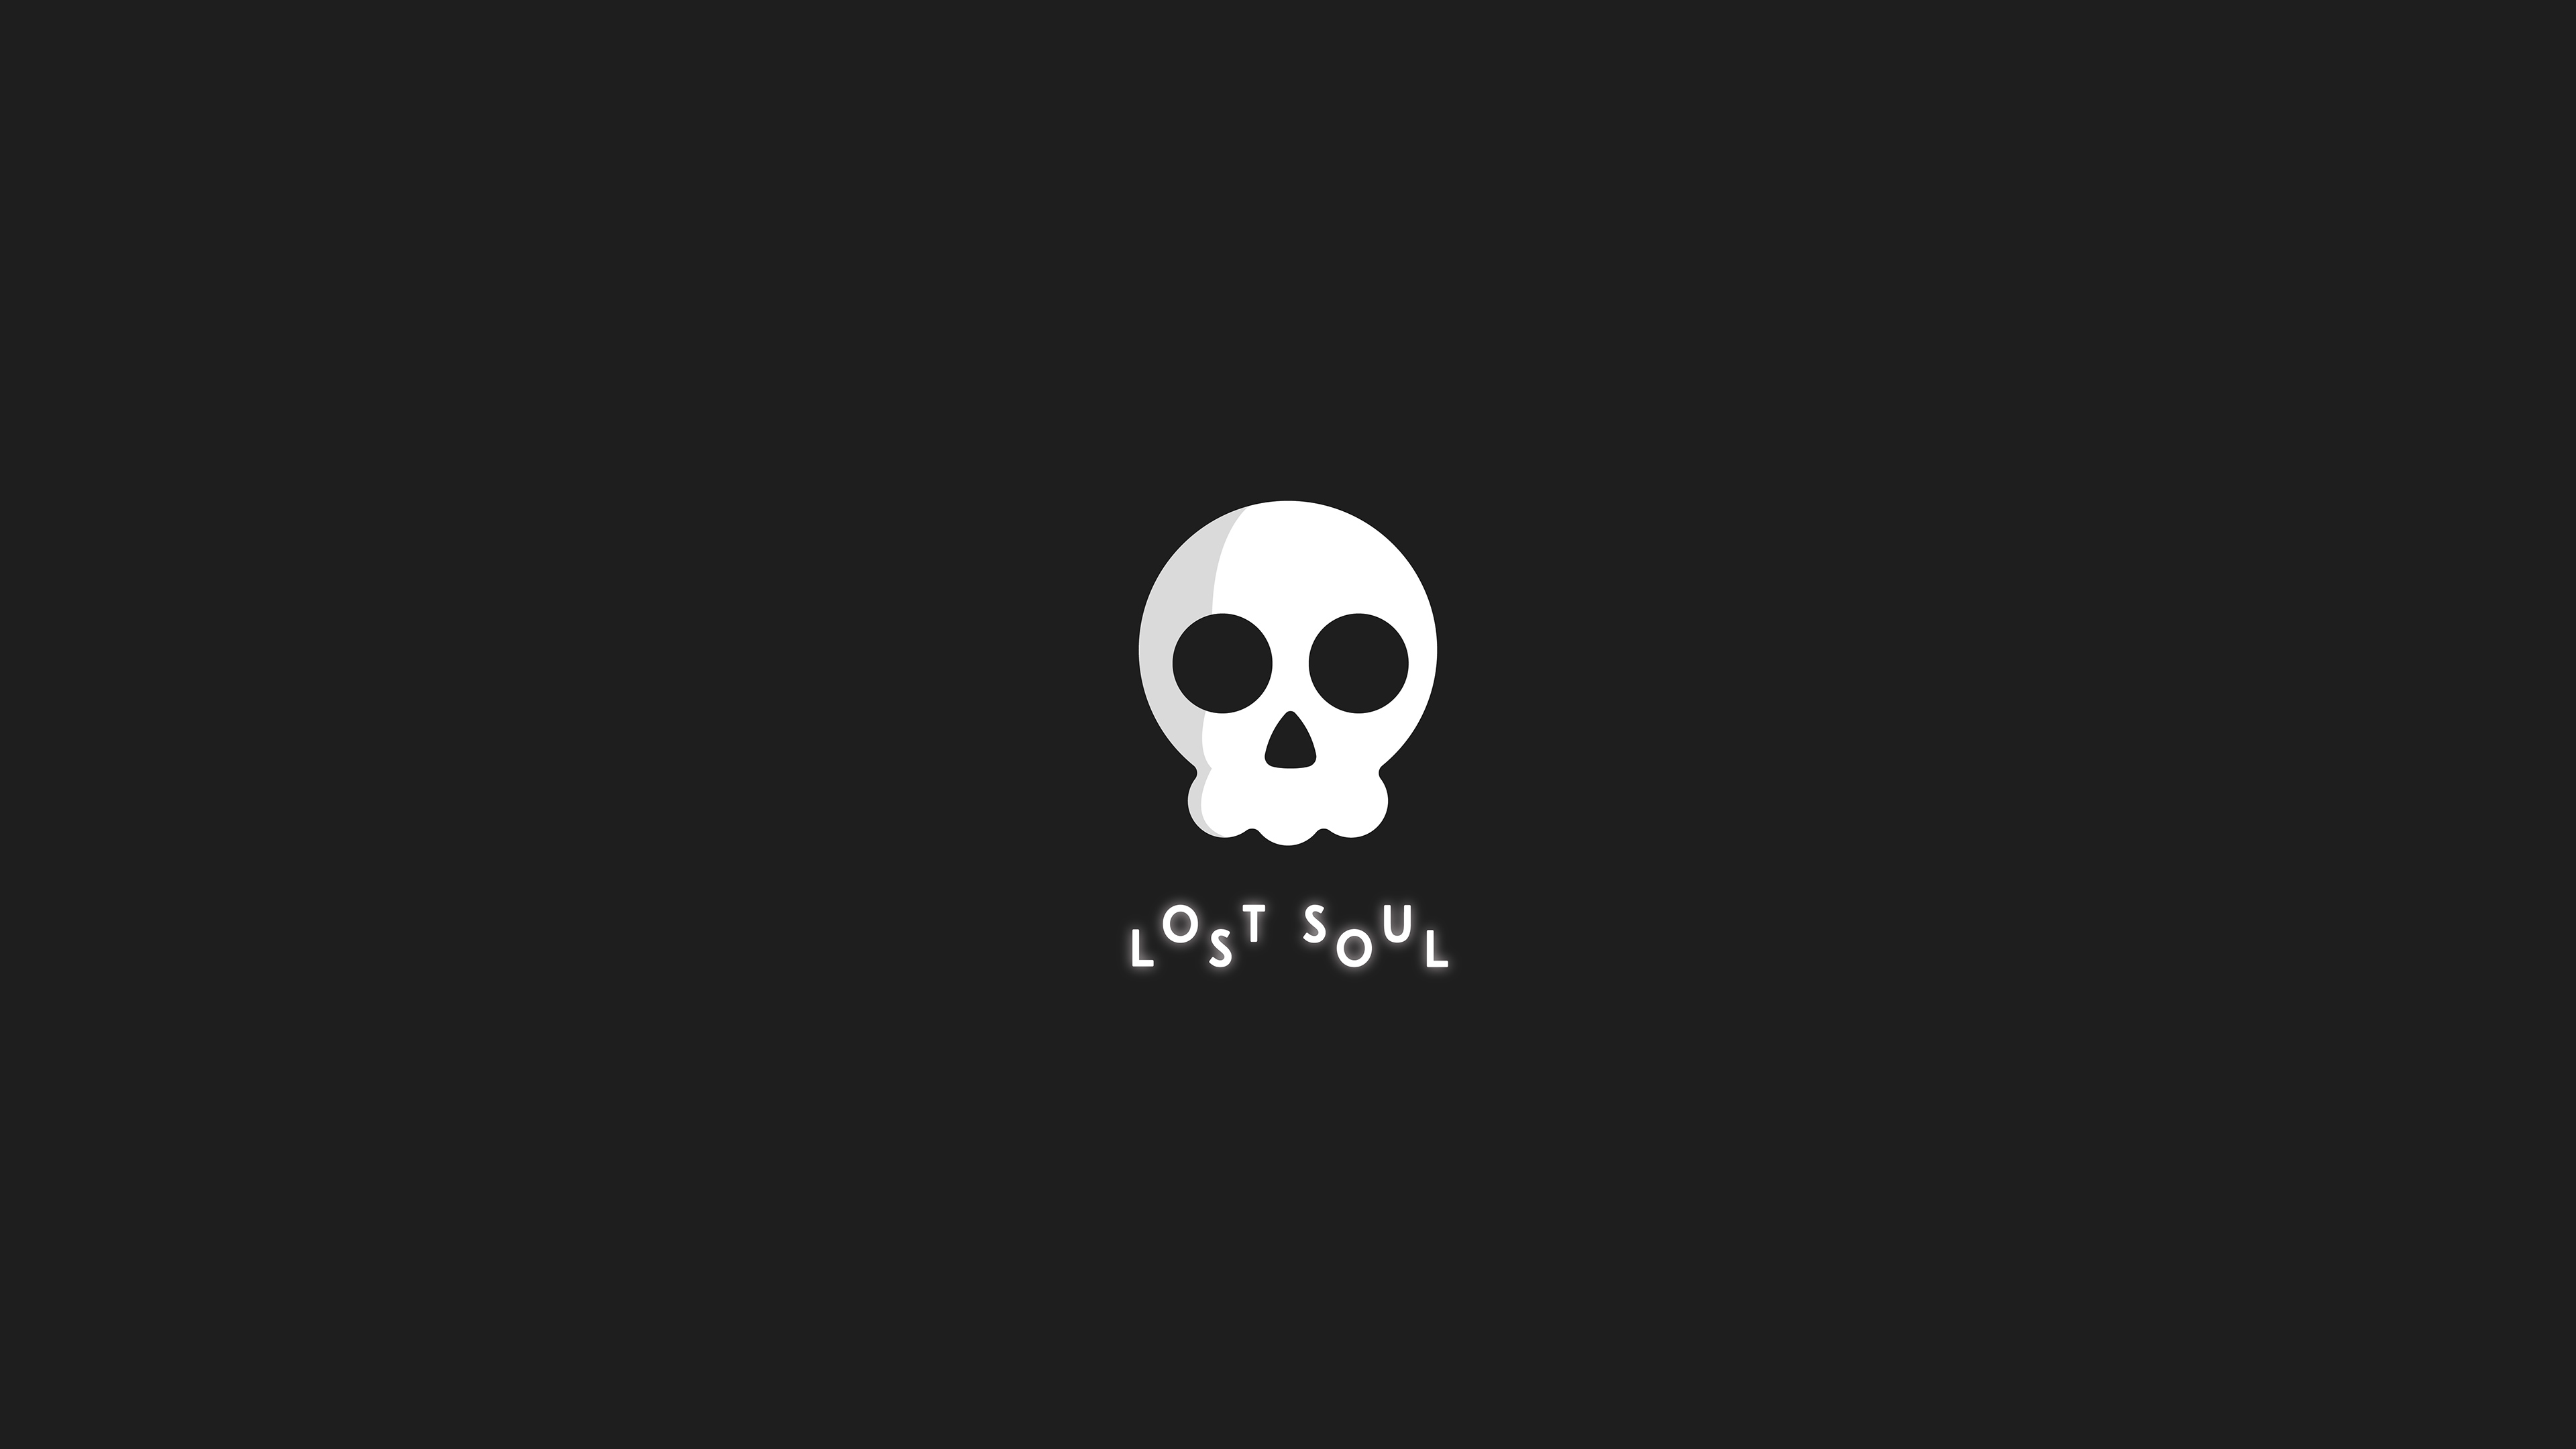 Lost soul dark background minimal k hd artist k wallpapers images backgrounds photos and pictures